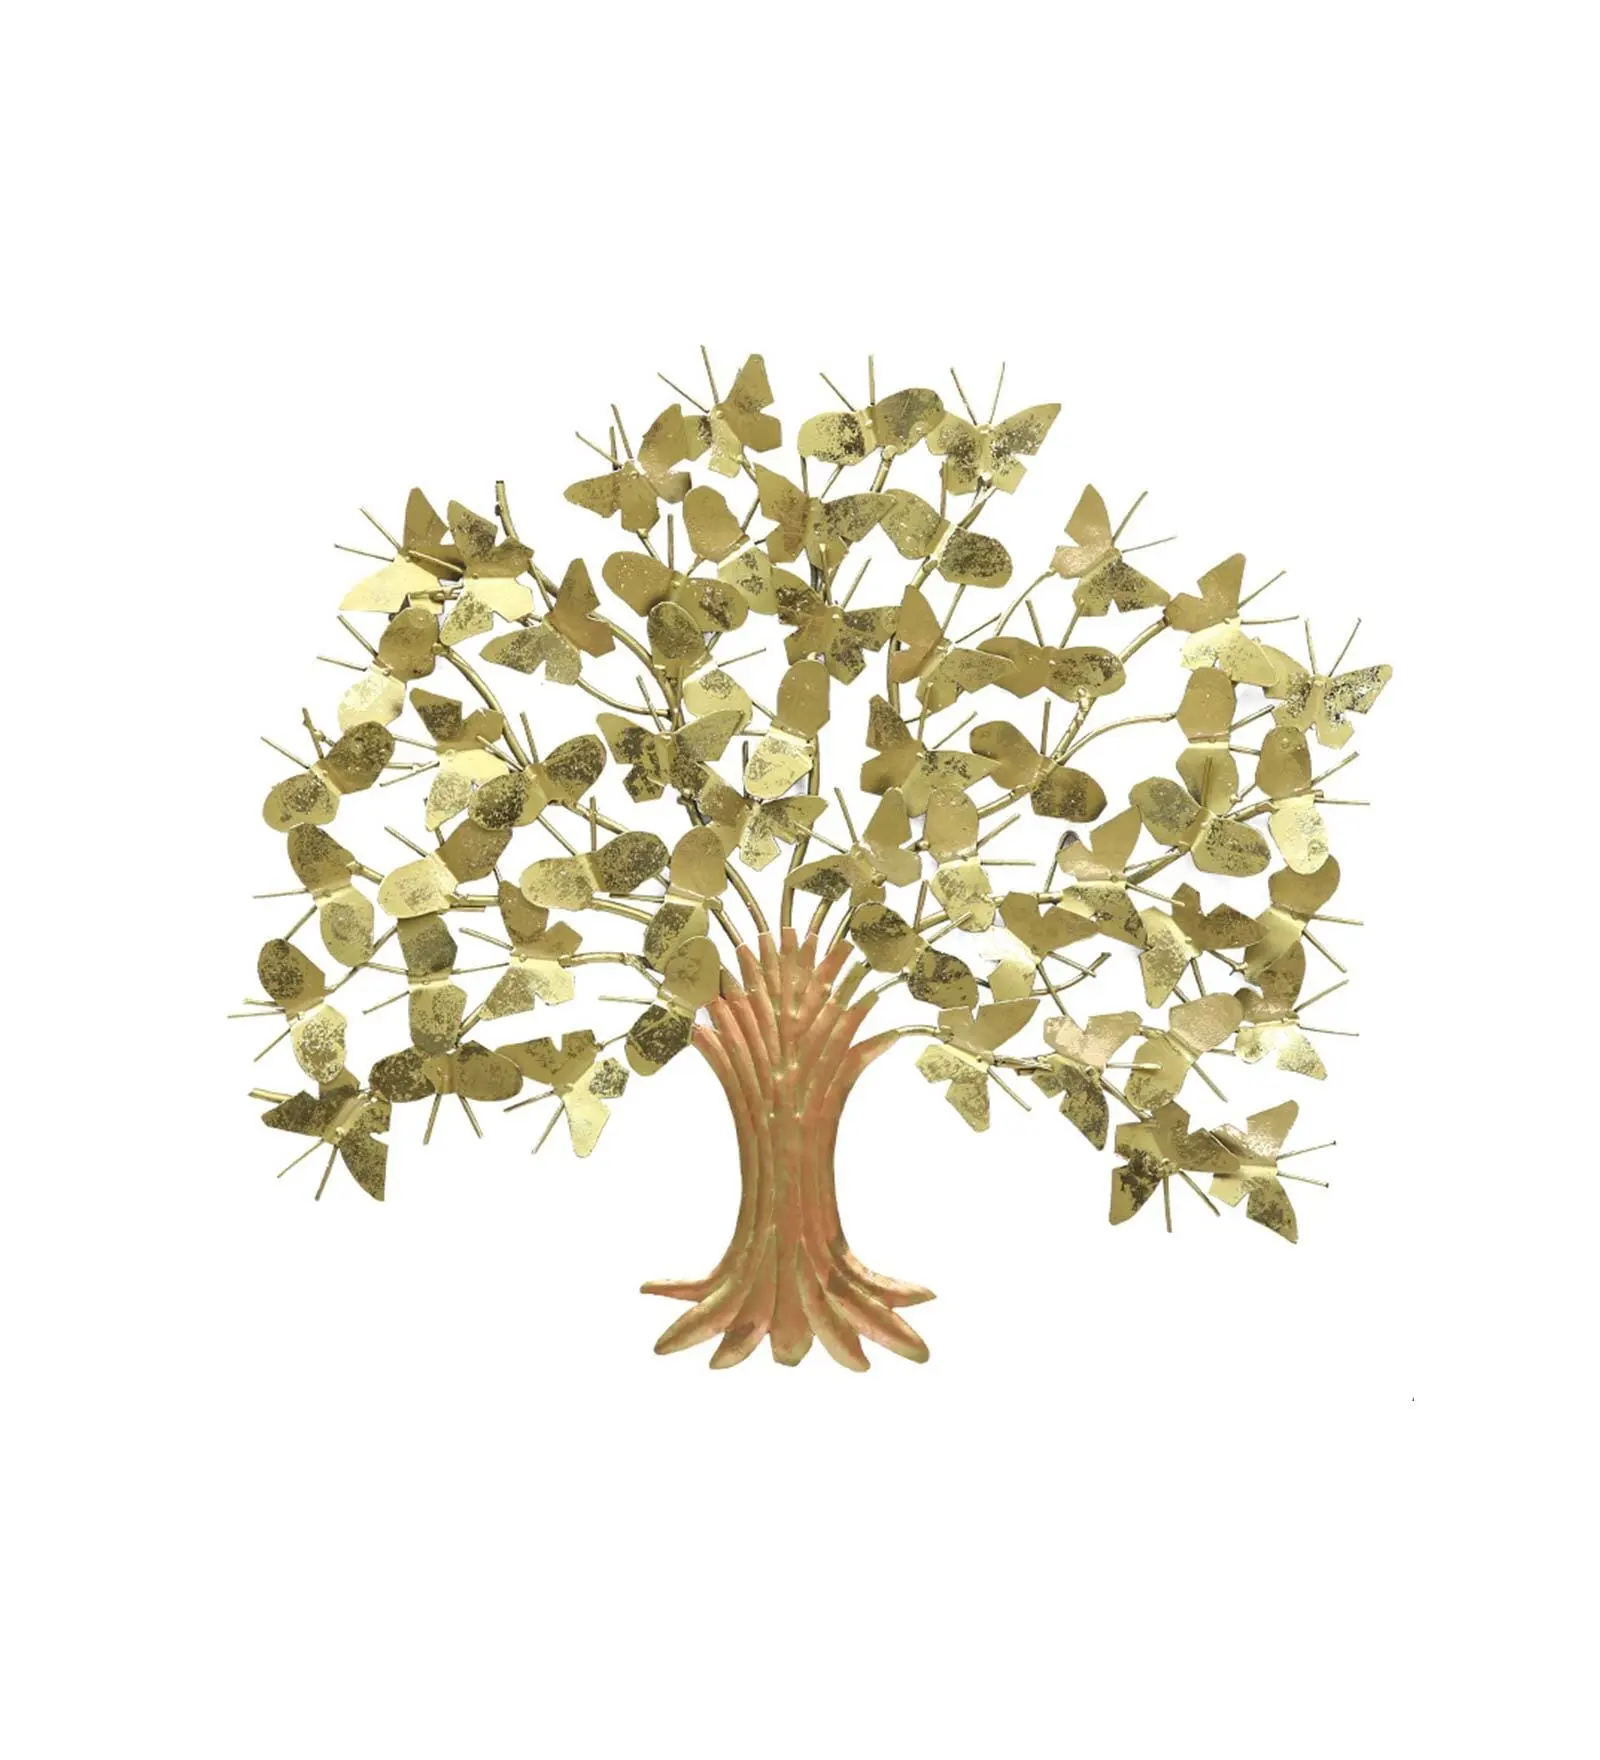 Butterflies On Tree Wall Decor Accents Brings You 3D Style An Excellent Focal Point For Your Existing Home Furnishing Decor